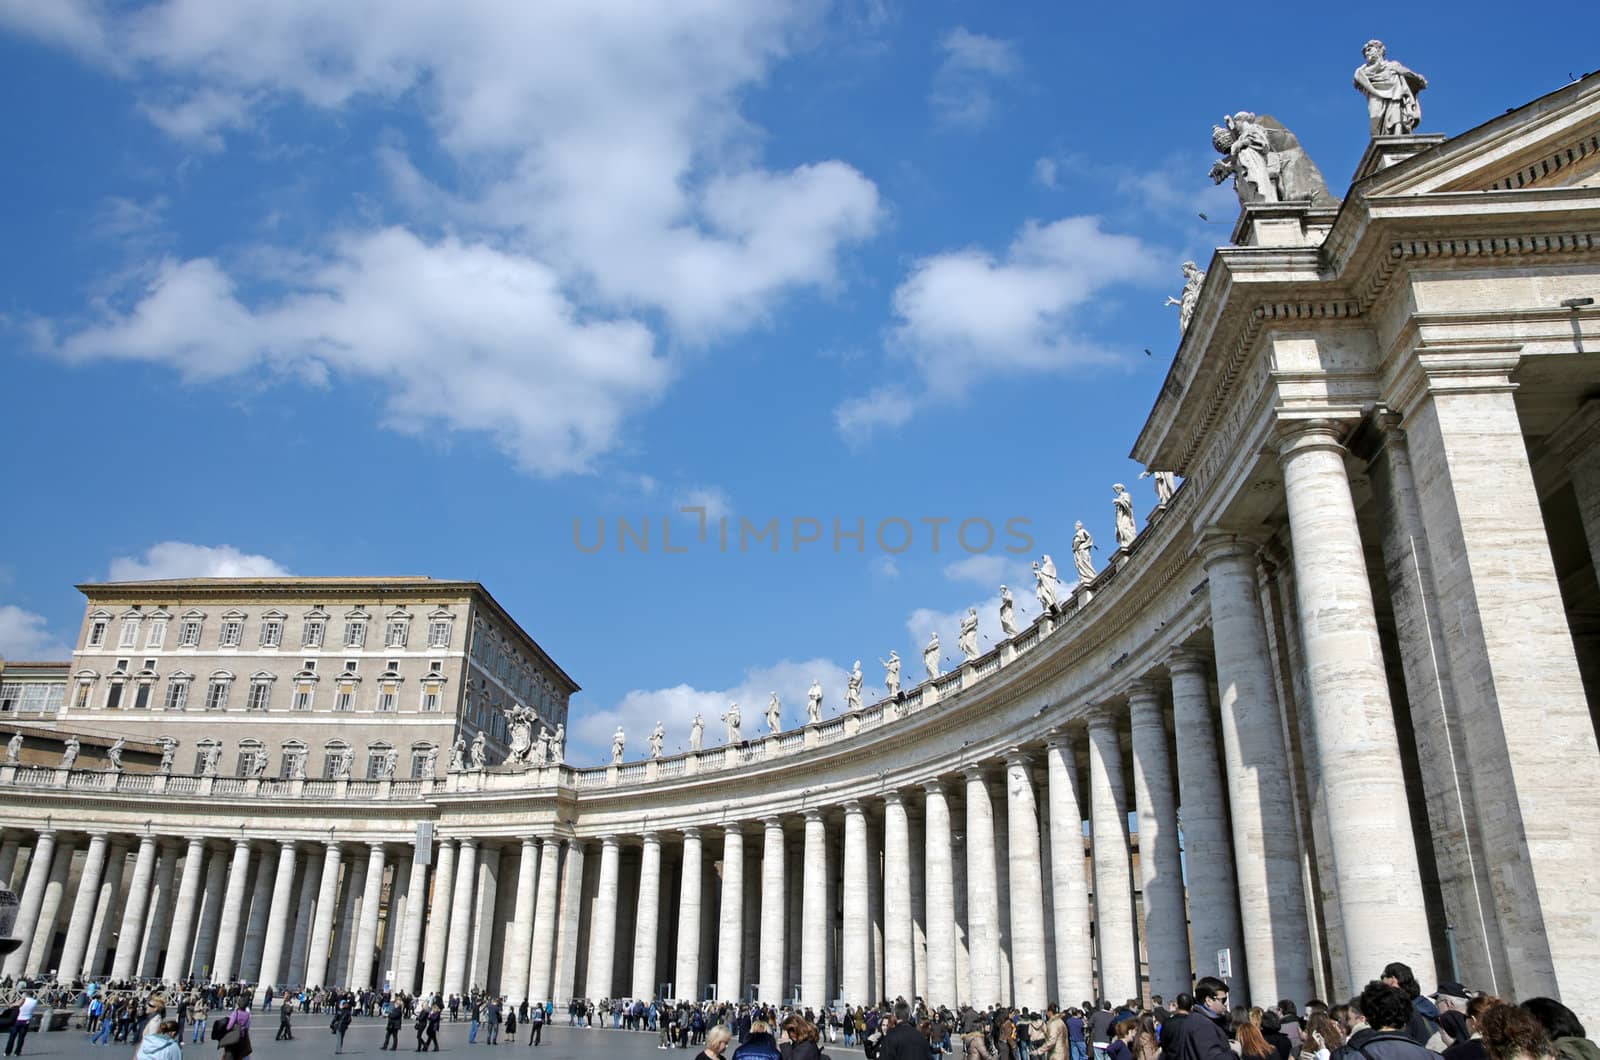 ROME, ITALY - MARCH 11: Saint Peter's Square Collonade in Vatican City on March 11, 2011 in Rome, Italy